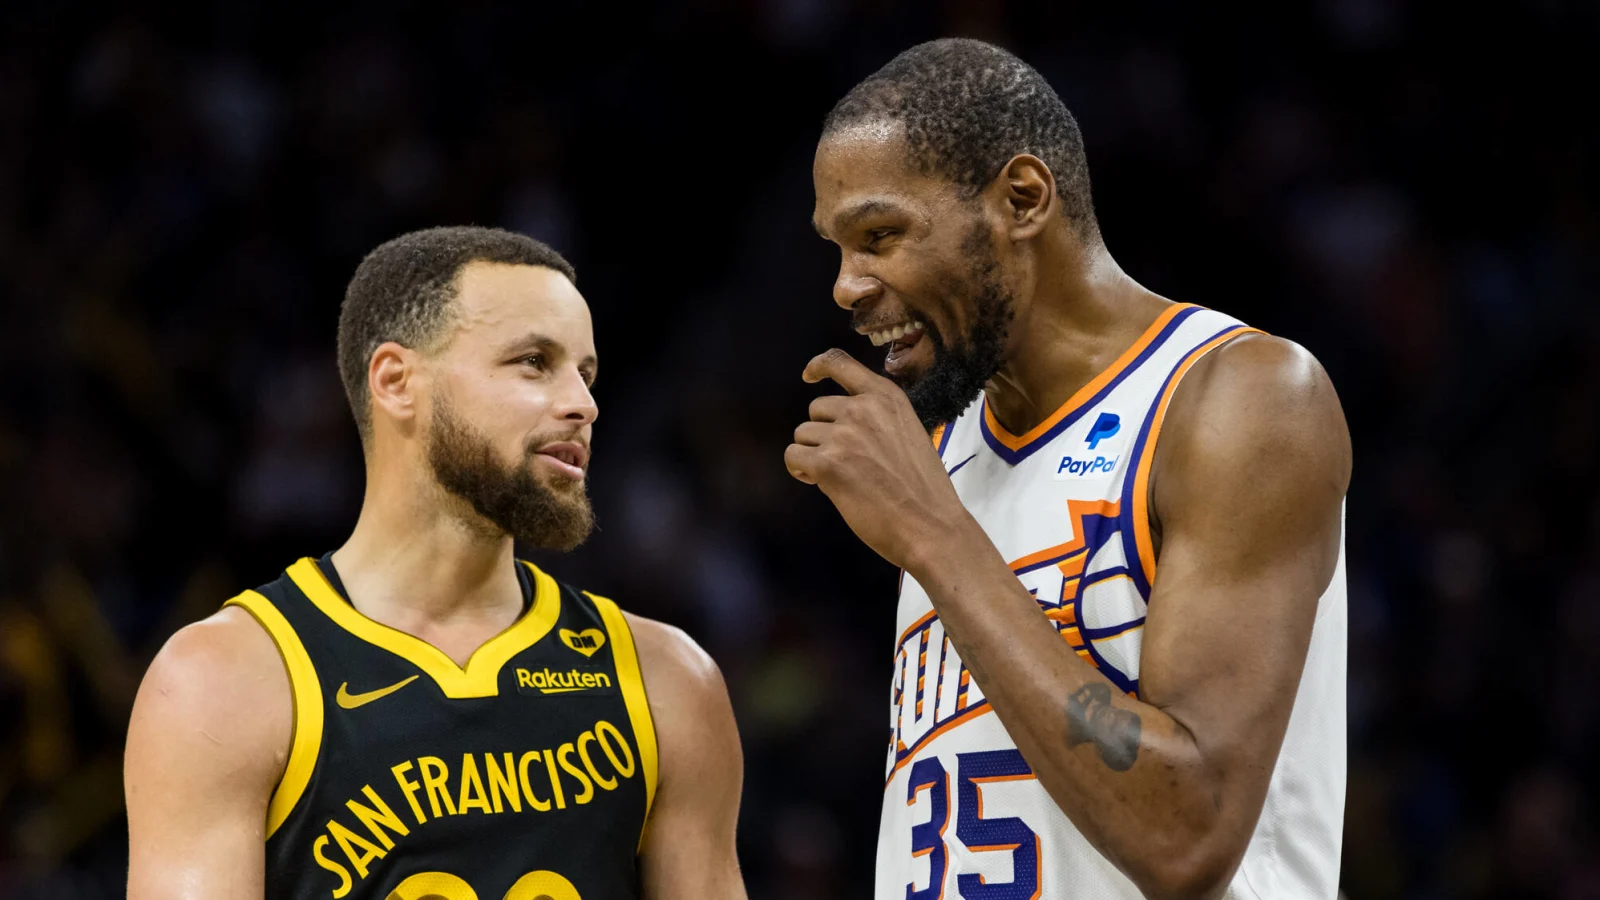 Kevin Durant calls Stephen Curry the greatest point guard ever